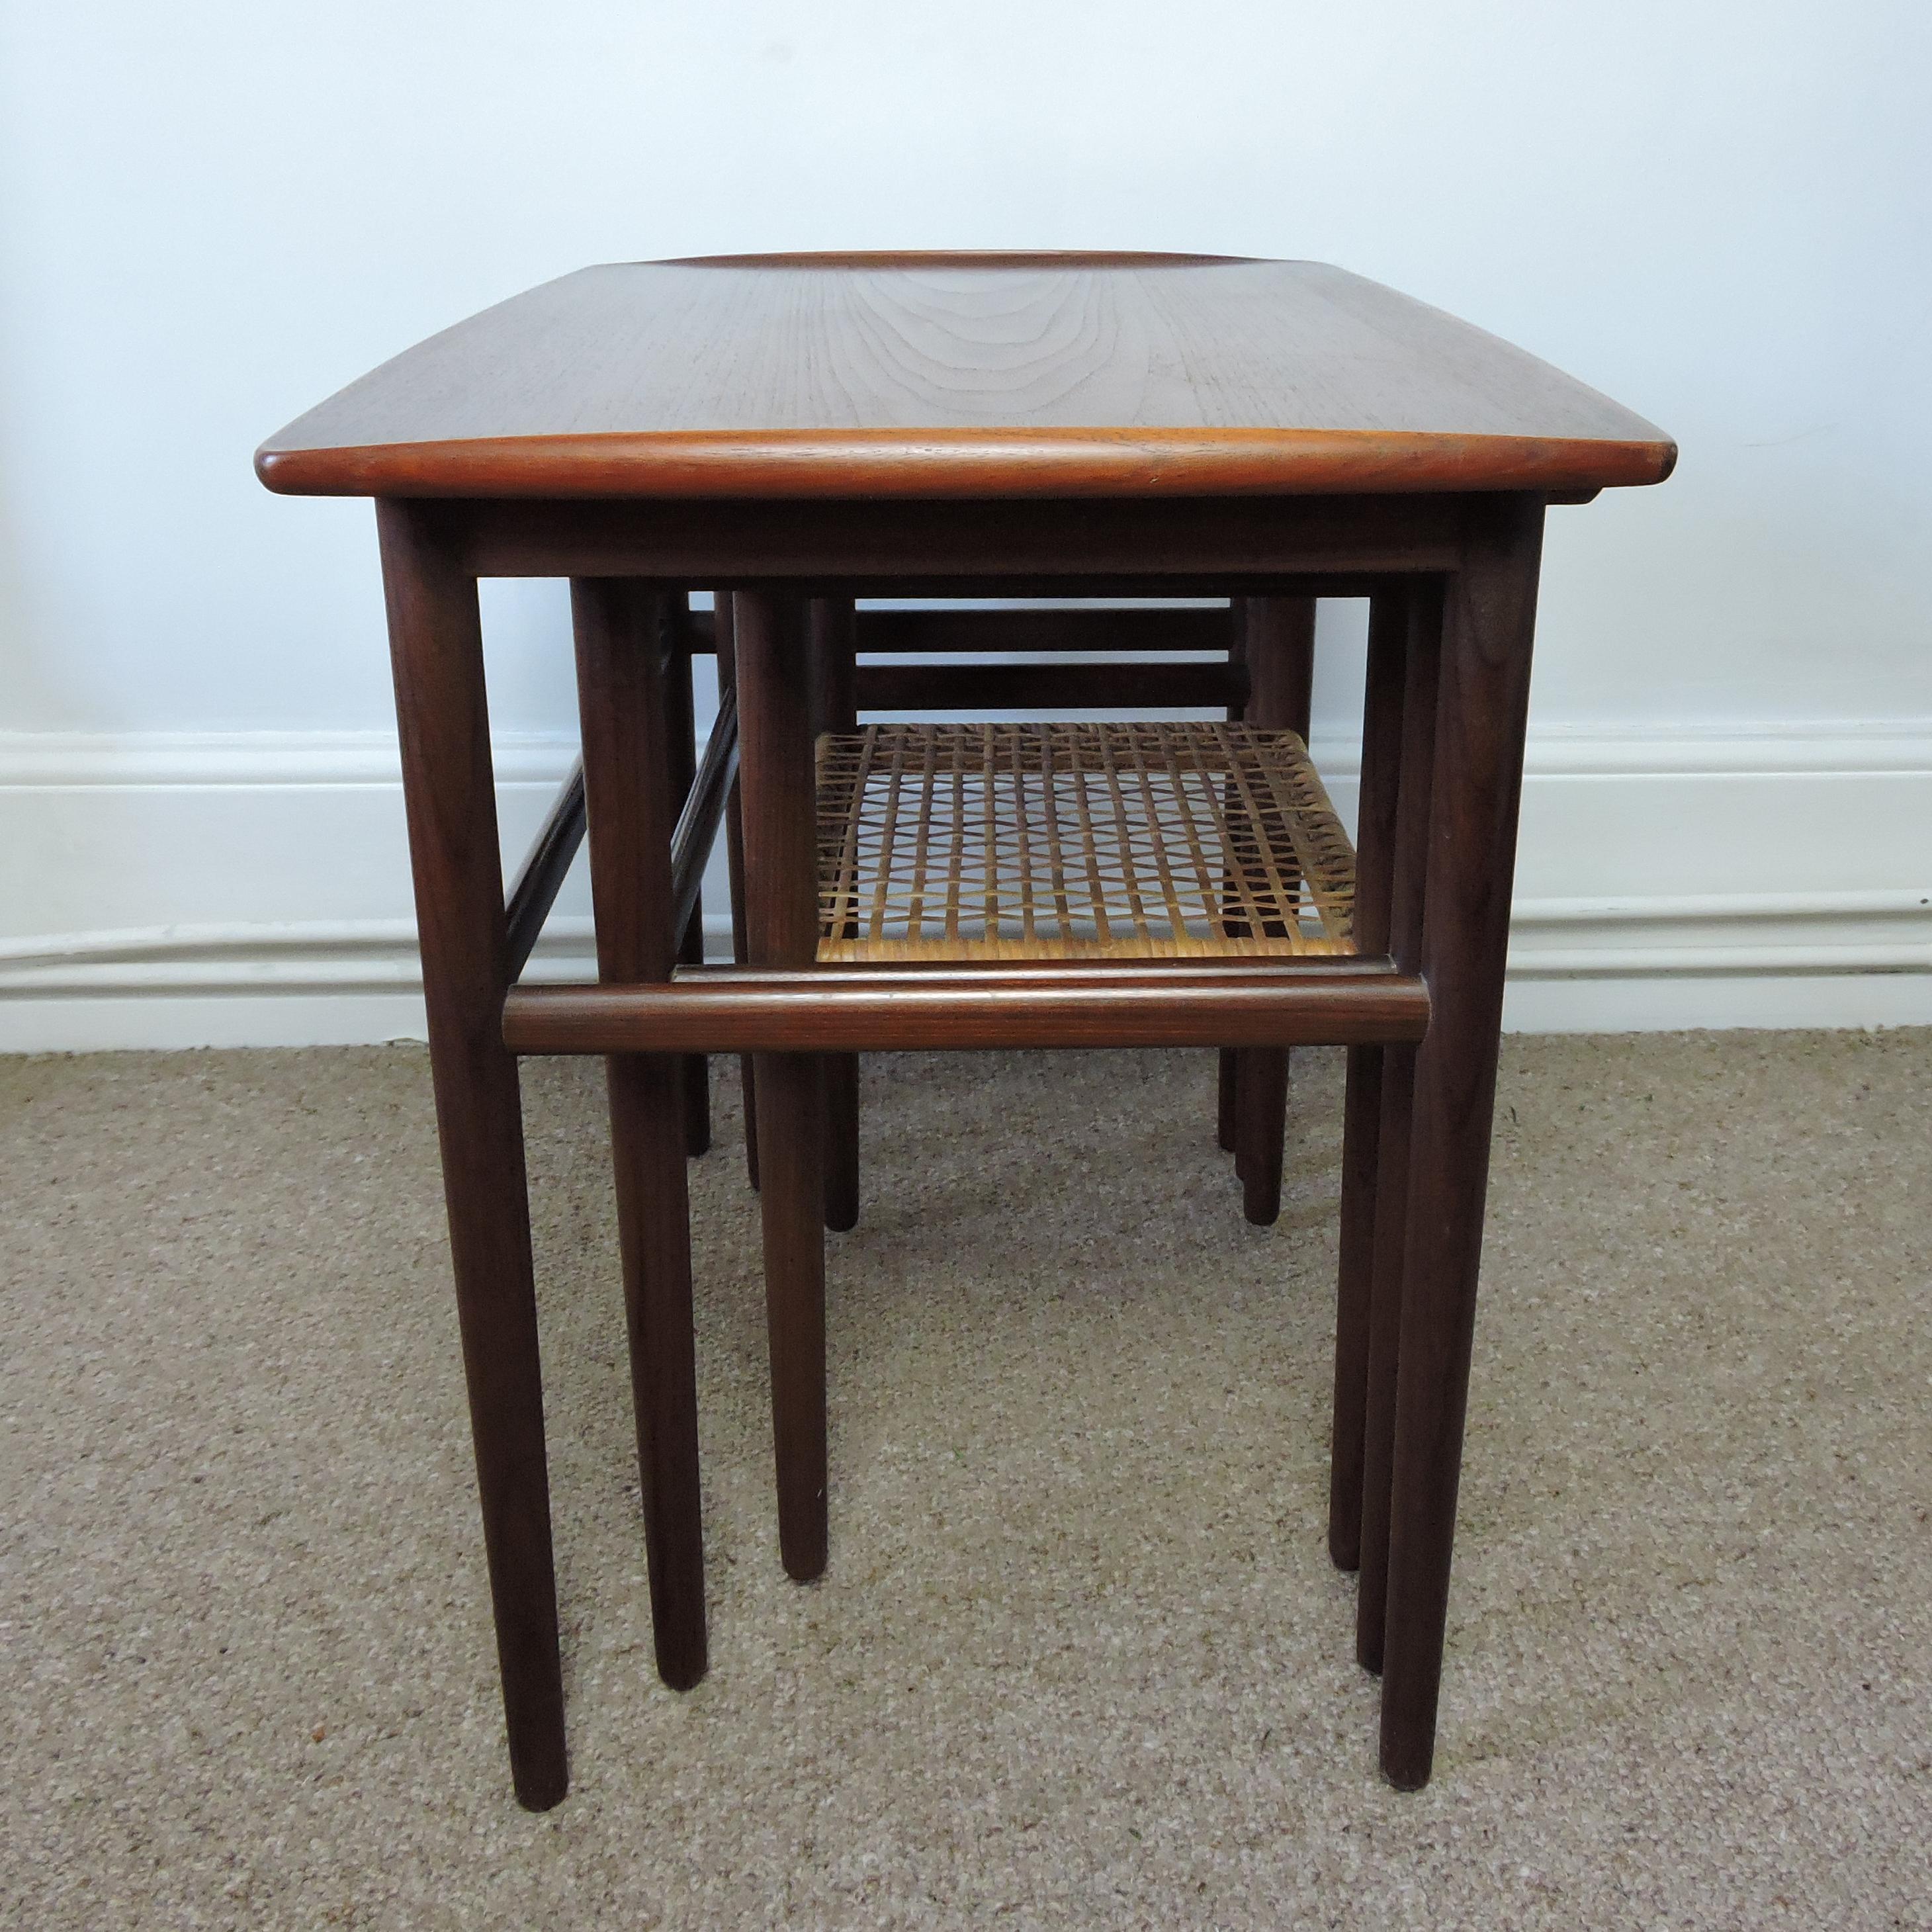 Midcentury Danish Teak and Cane Nesting Tables, 1950s In Good Condition For Sale In Chesham, GB